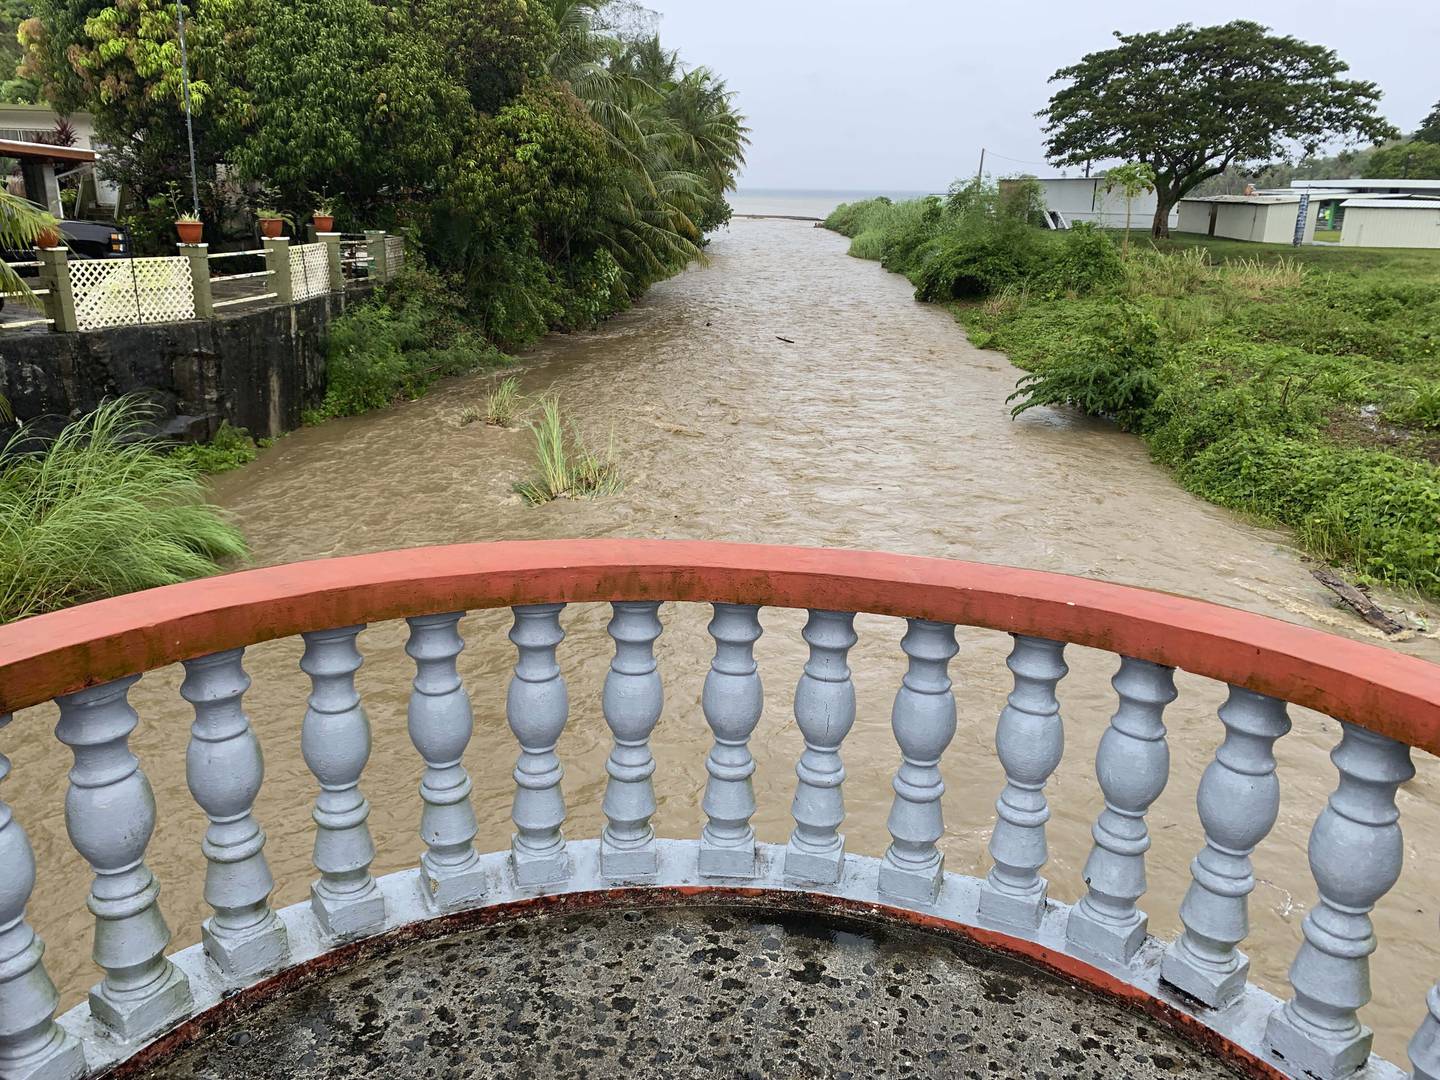 The Laelae River in Umatac, Guam, becomes swollen with the addition of rain runoff resulting from increased shower activity as Typhoon Mawar approaches the region on May 23, 2023.